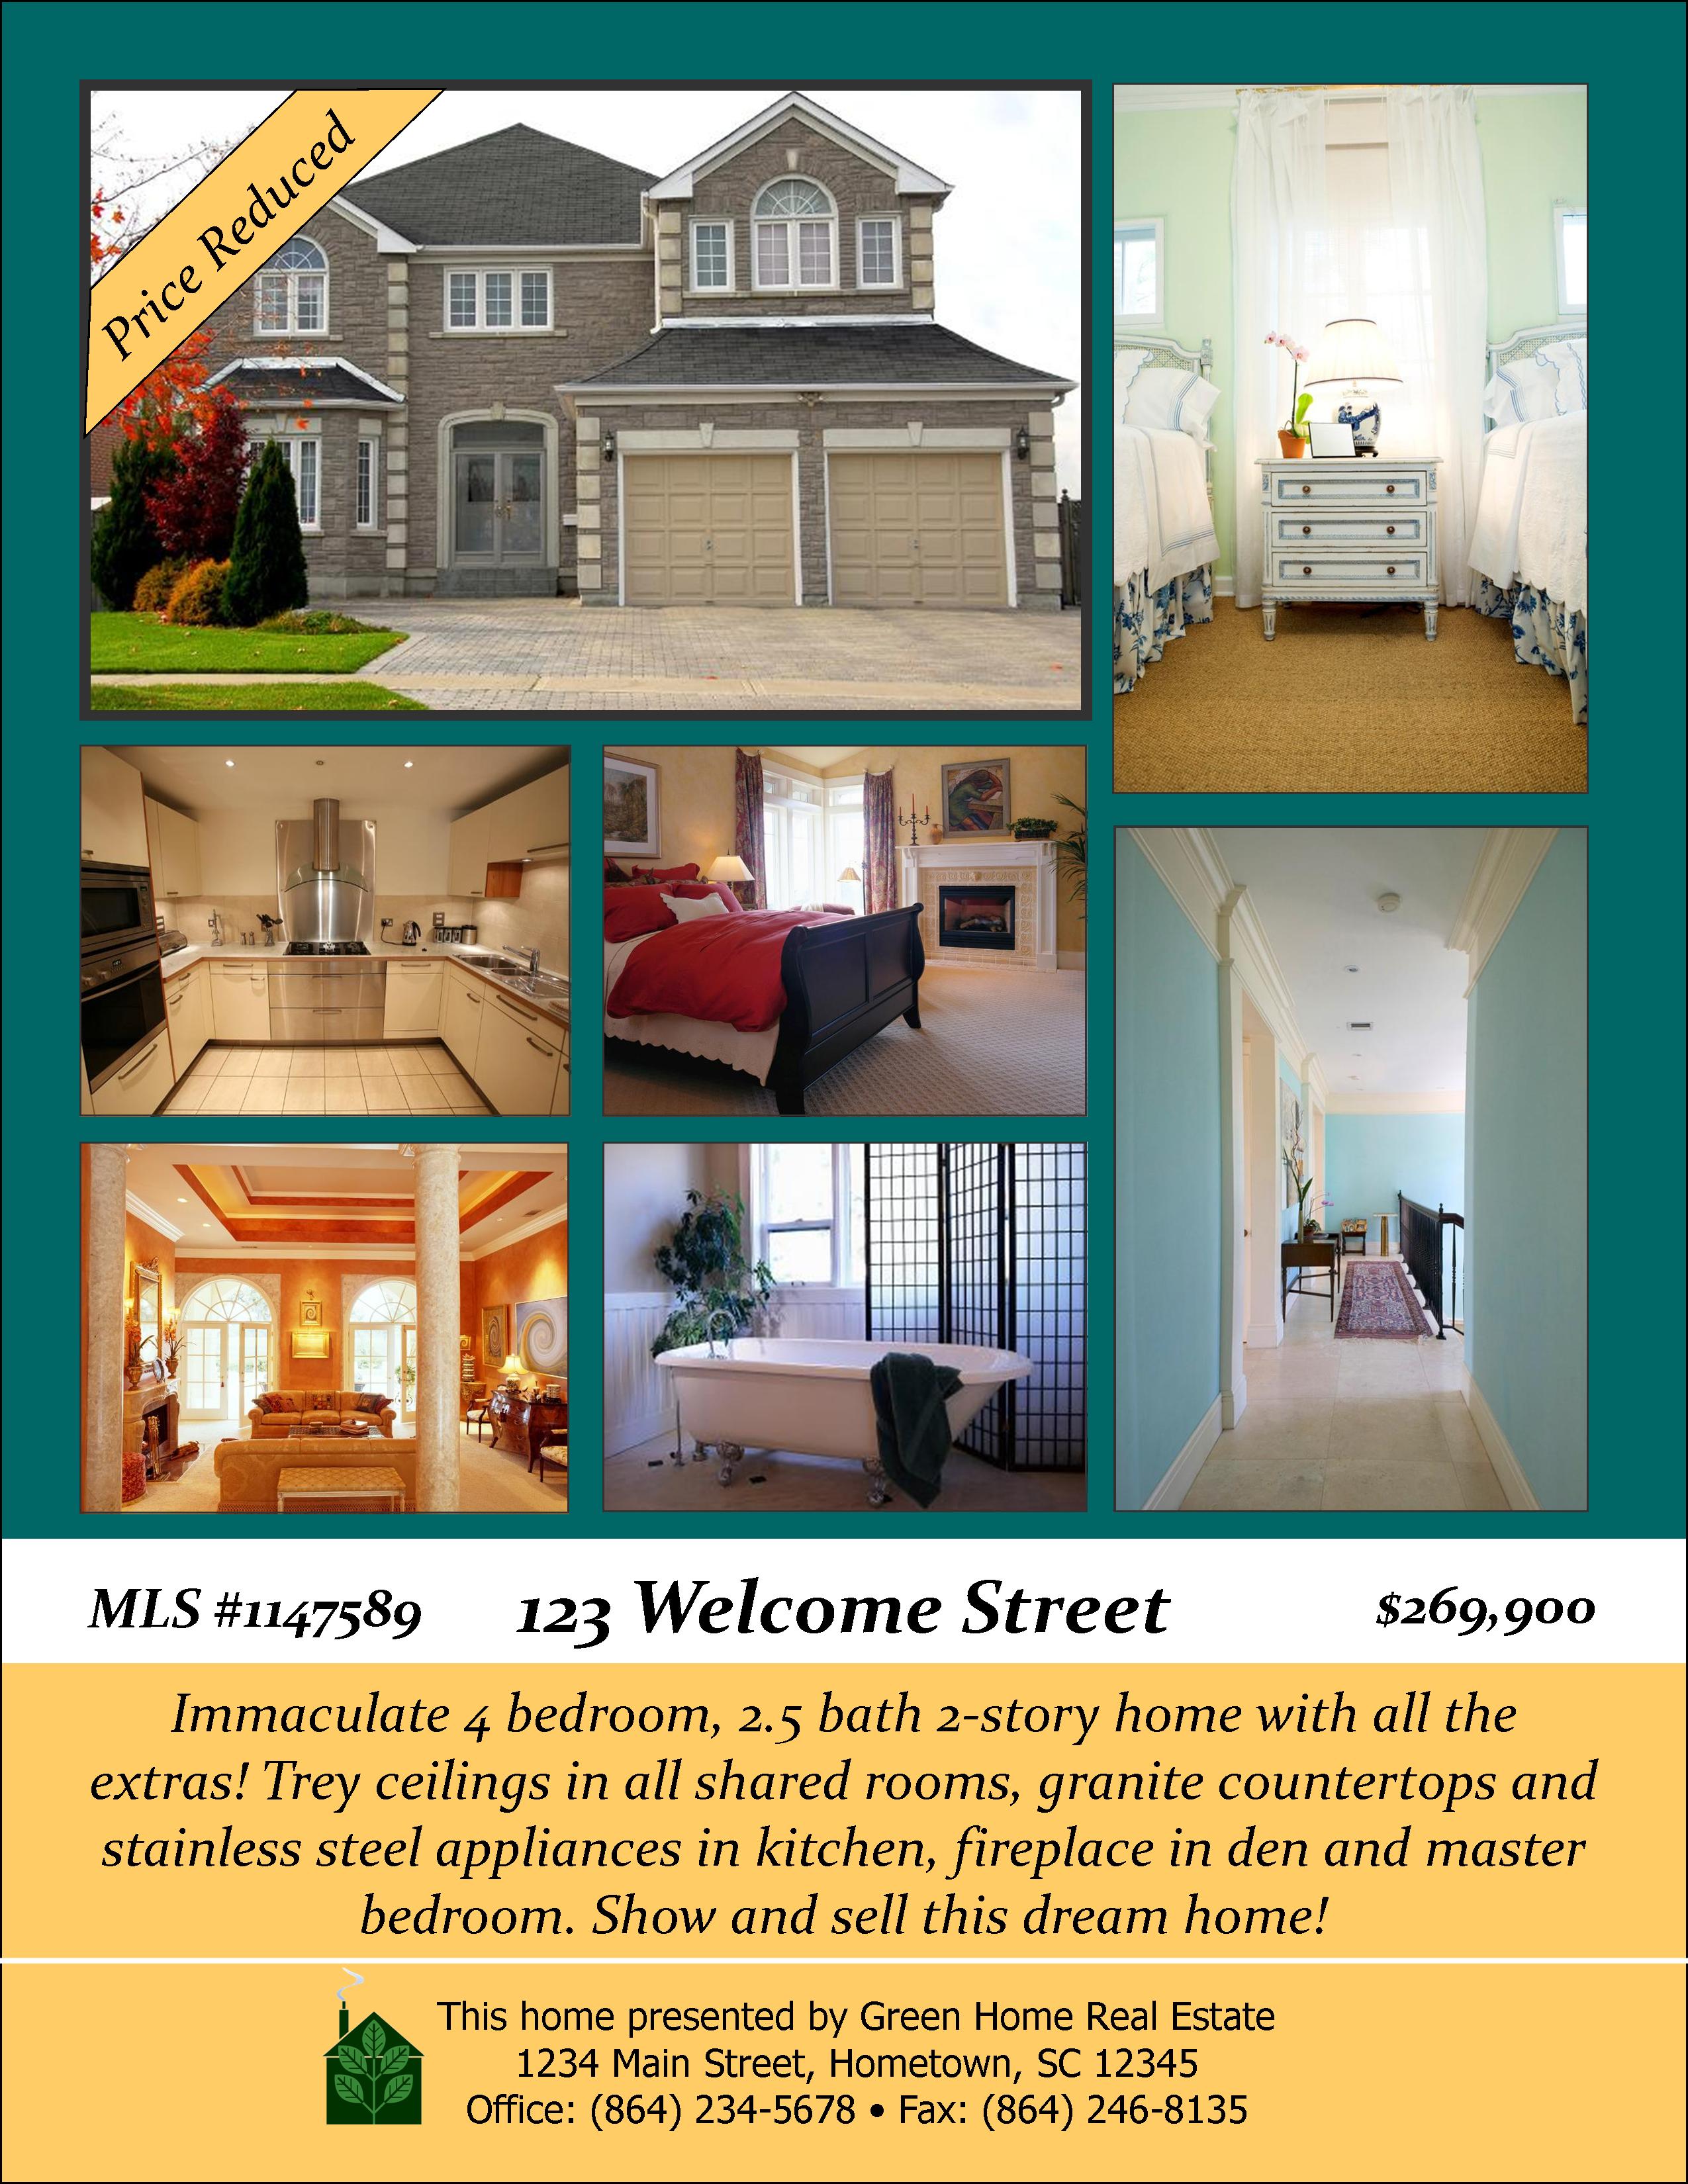 Open House Designs | Real Estate Flyers, Booklets ...